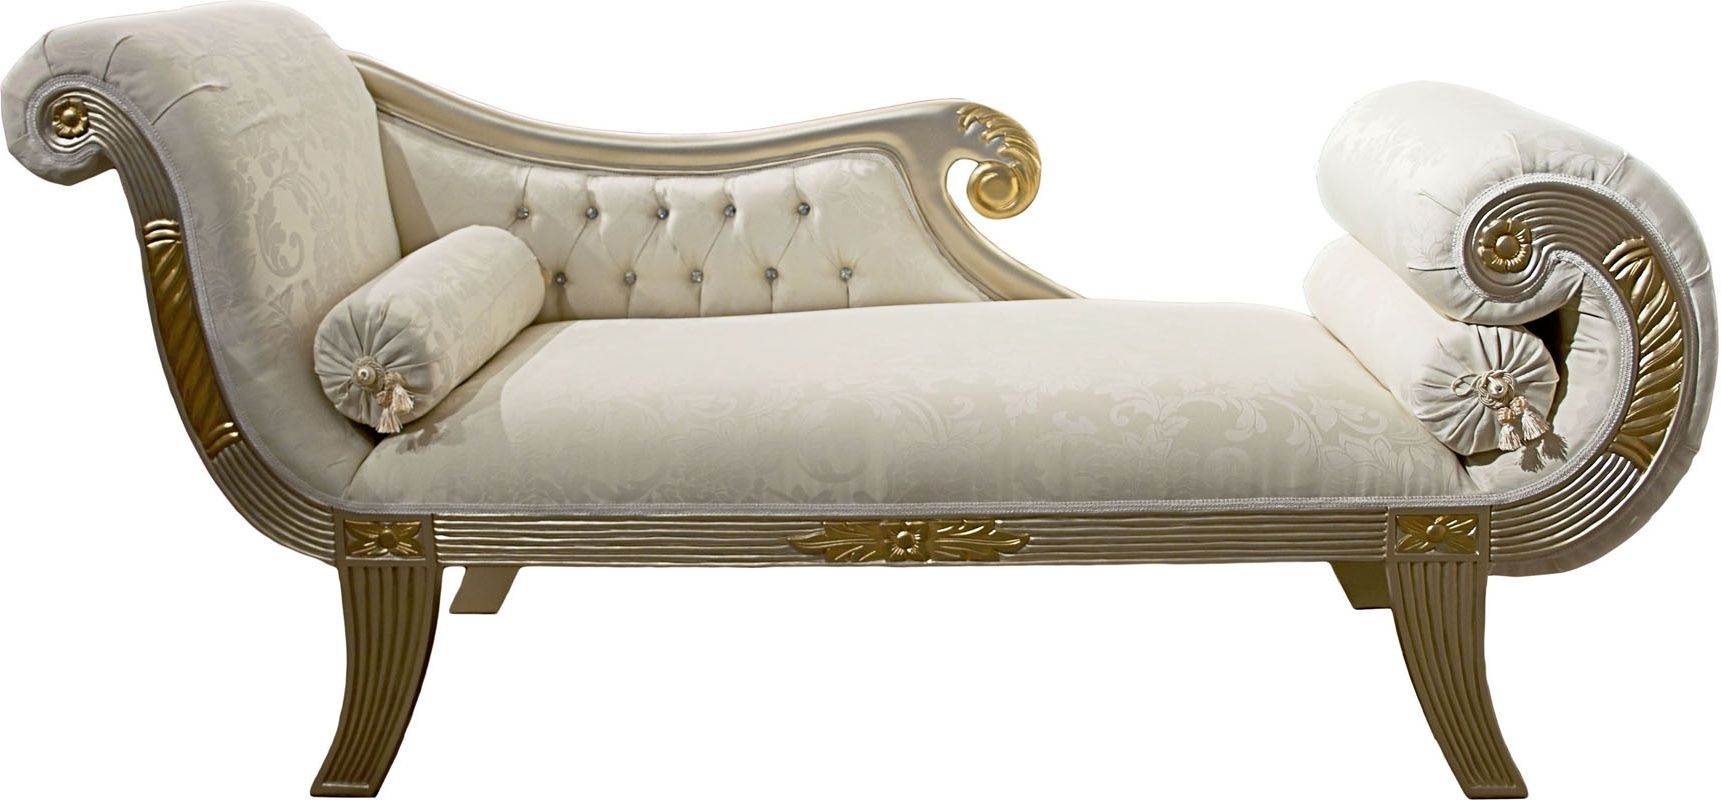 Well Known Vintage Chaise Lounges In White Leather Vintage Chaise Lounge Chair In Victorian Style Plus (View 5 of 15)